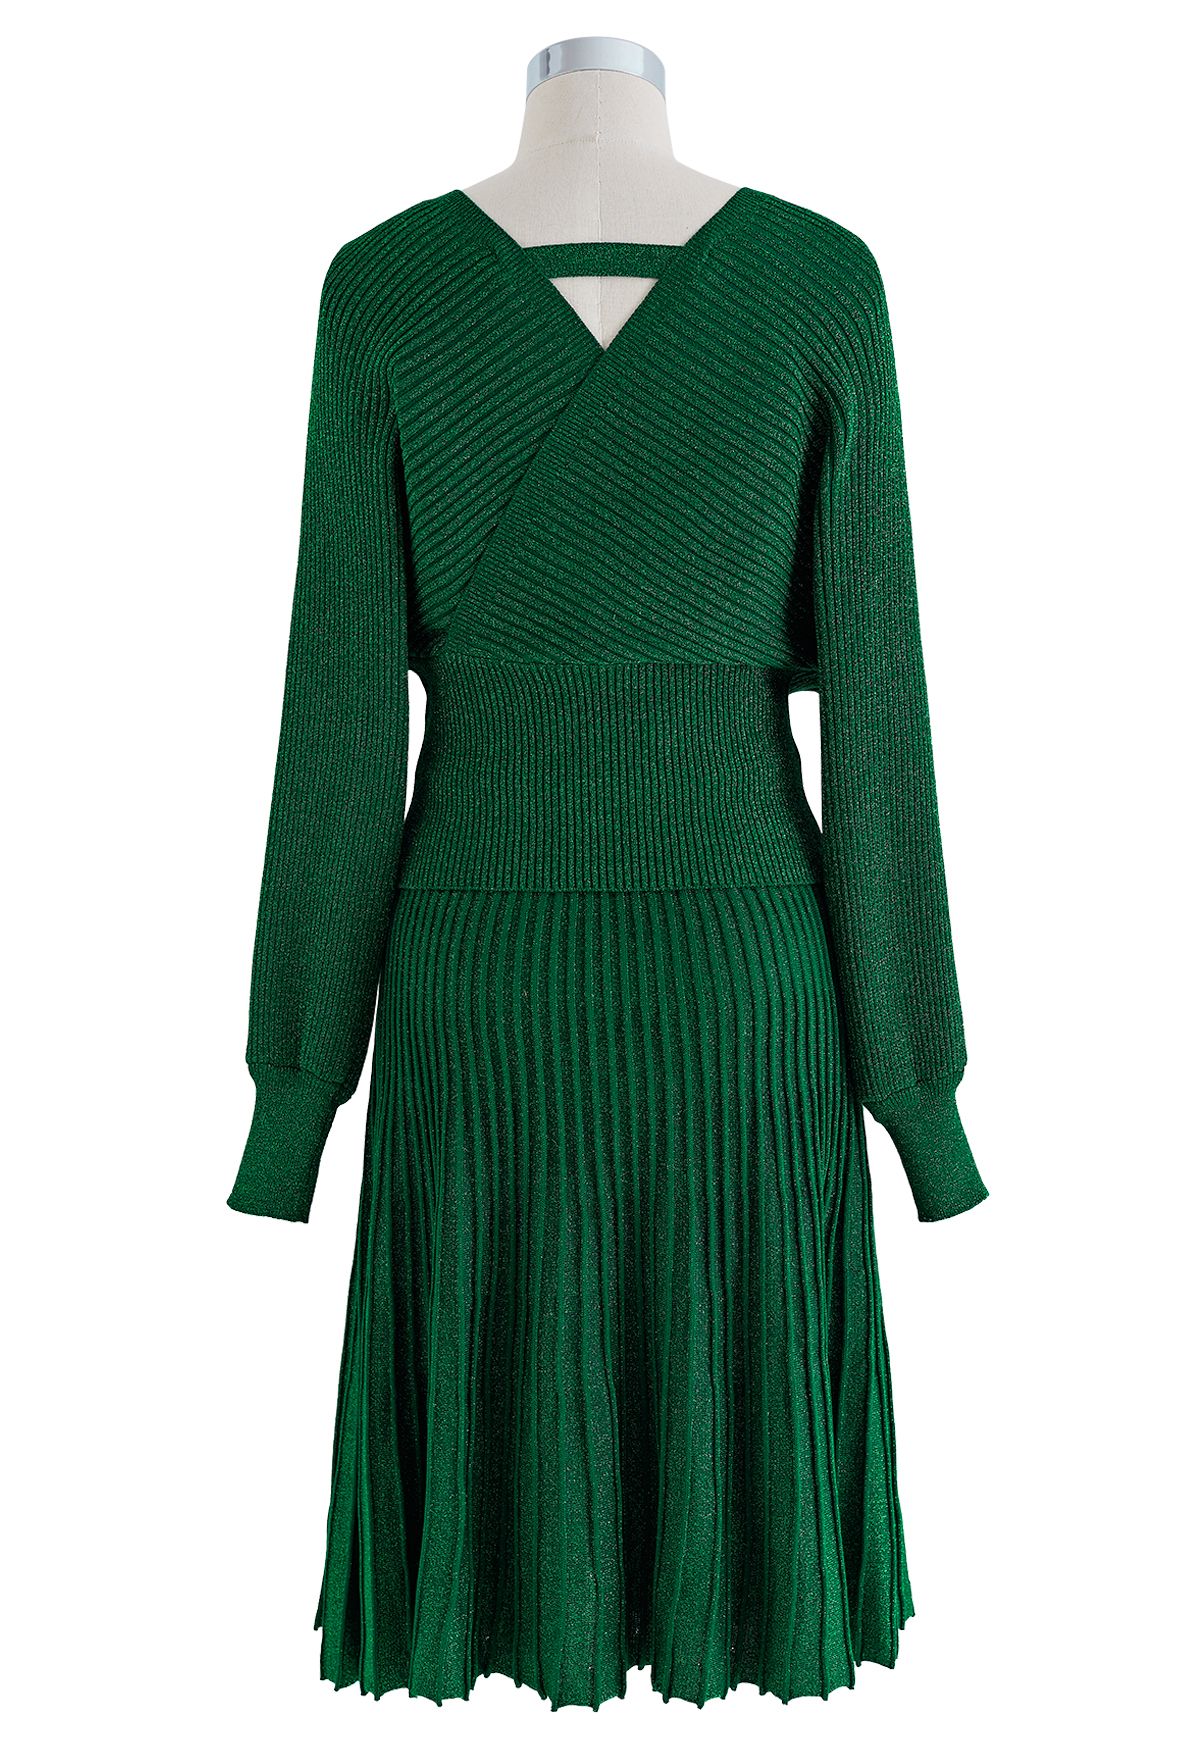 Glittering Ribbed Wrap Top and Pleated Skirt Knit Set in Emerald